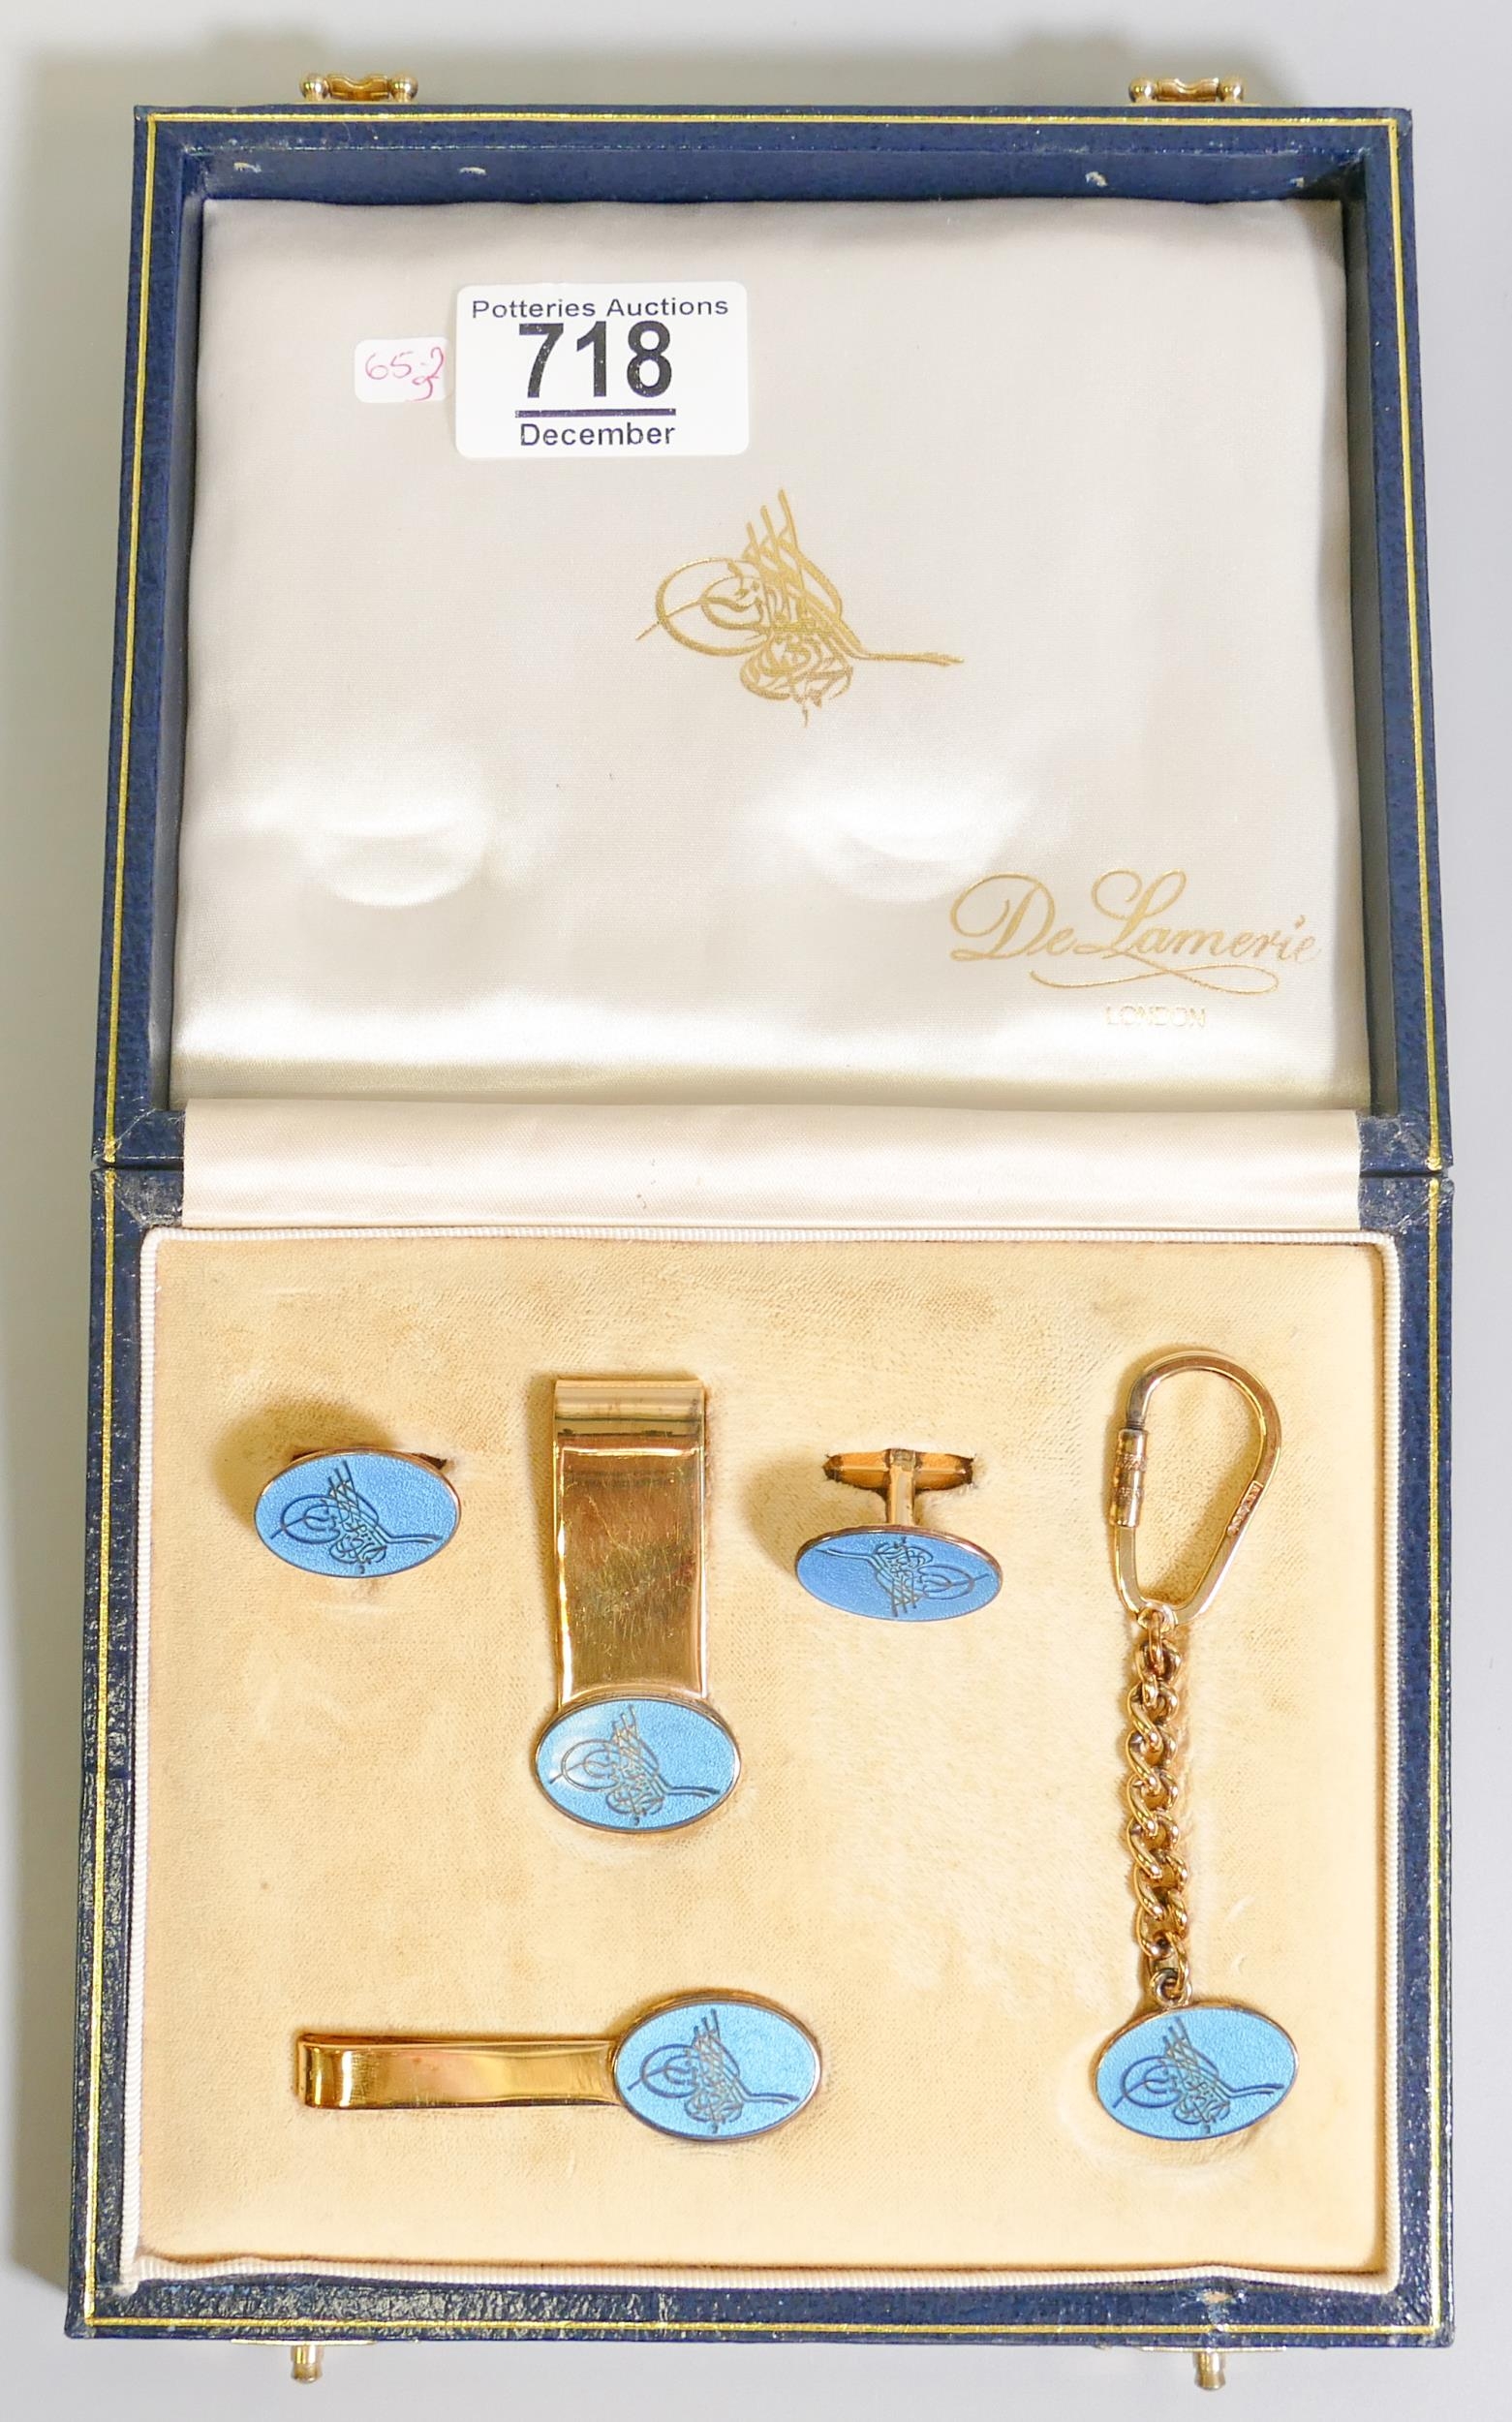 De Lamerie Fine Bone China gold plated on silver enameled gift set including Money Clip, Tie Clip,